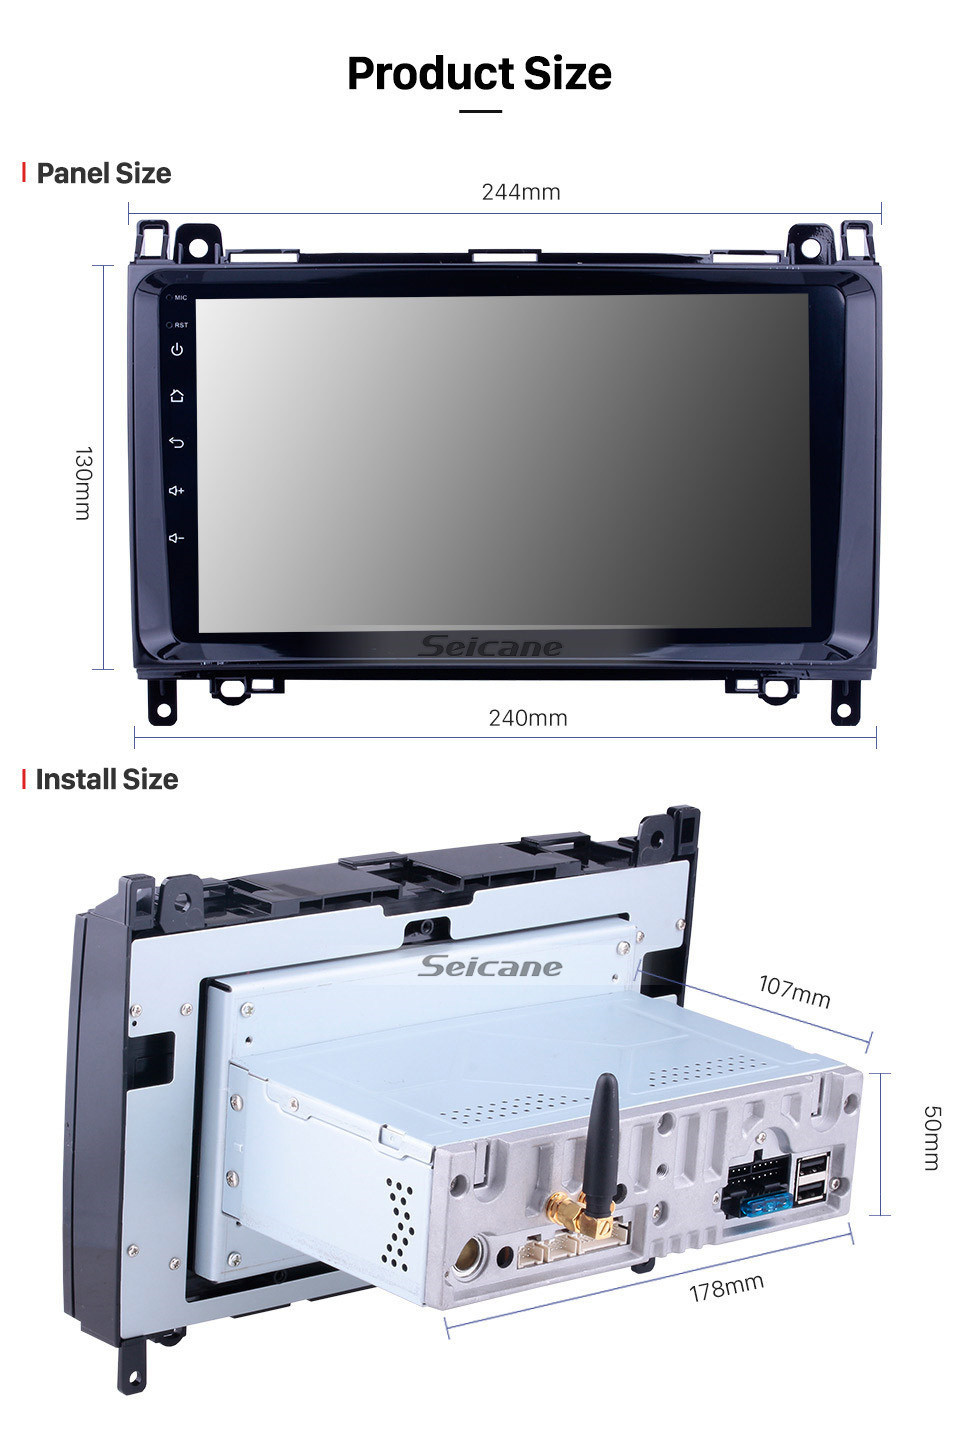 Seicane 9 inch HD 1024*600 Touch Screen Android 11.0 2006-2012 Mercedes Benz Sprinter 211 213 216 218 224 309 311 313 315 316 CDI Autoradio Navigation Head Unit with CD DVD Player Bluetooth AUX 3G WiFi HD 1080P OBD2 Mirror Link Backup Camera